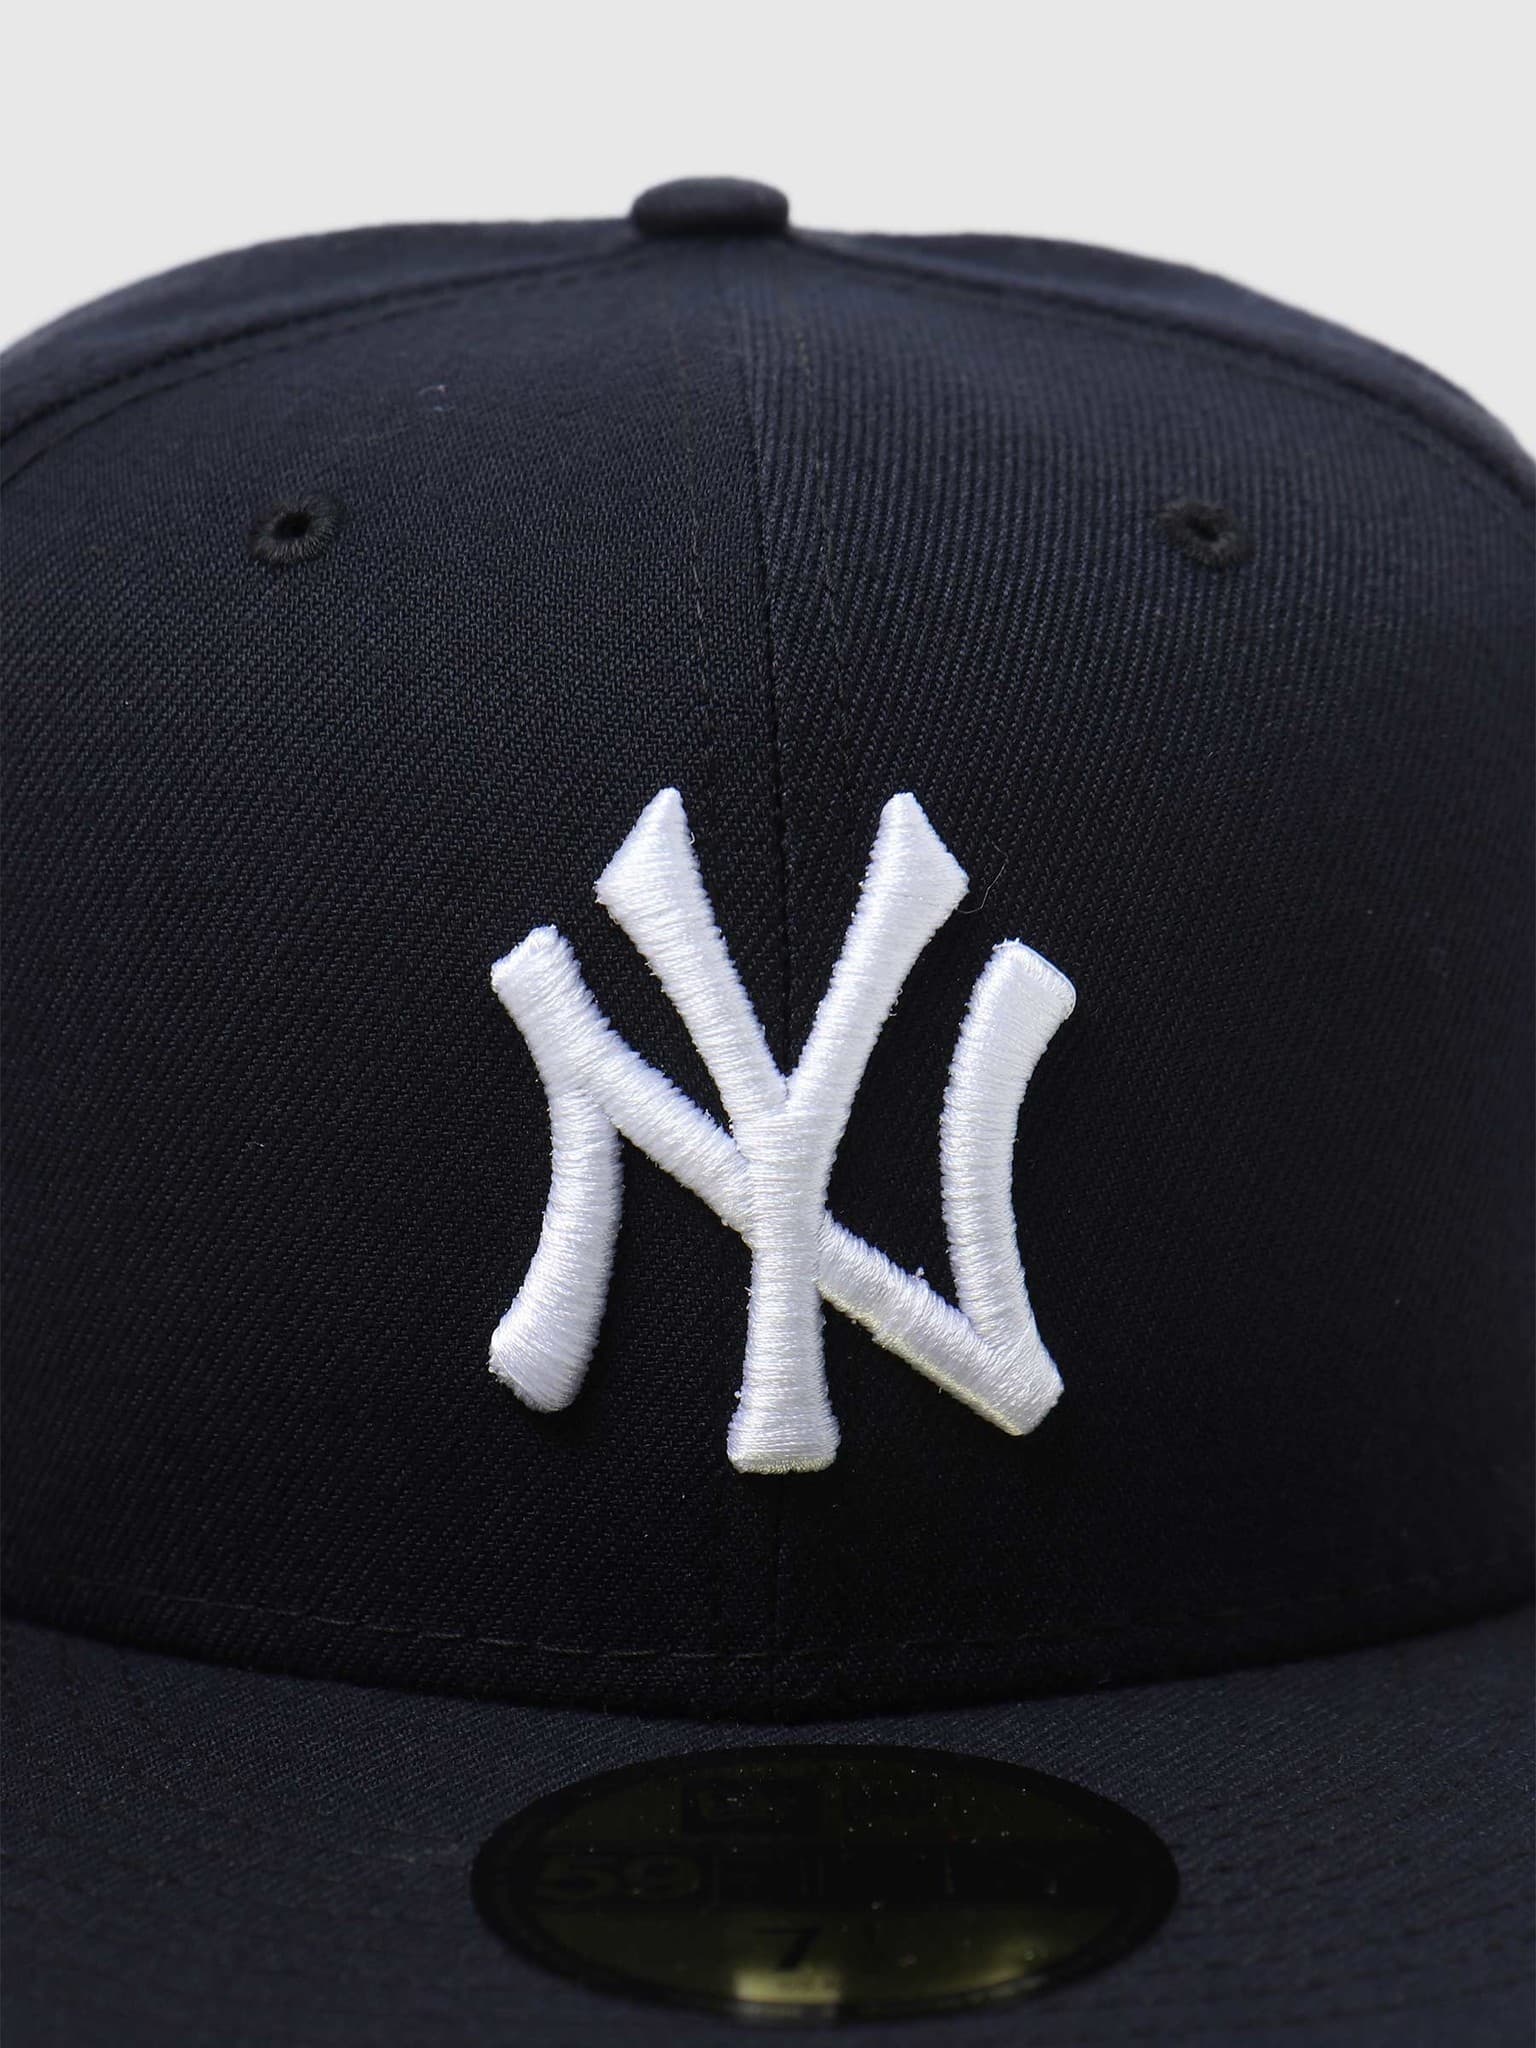 59fifty Fitted MLB Game Cap New York Yankees 70331909